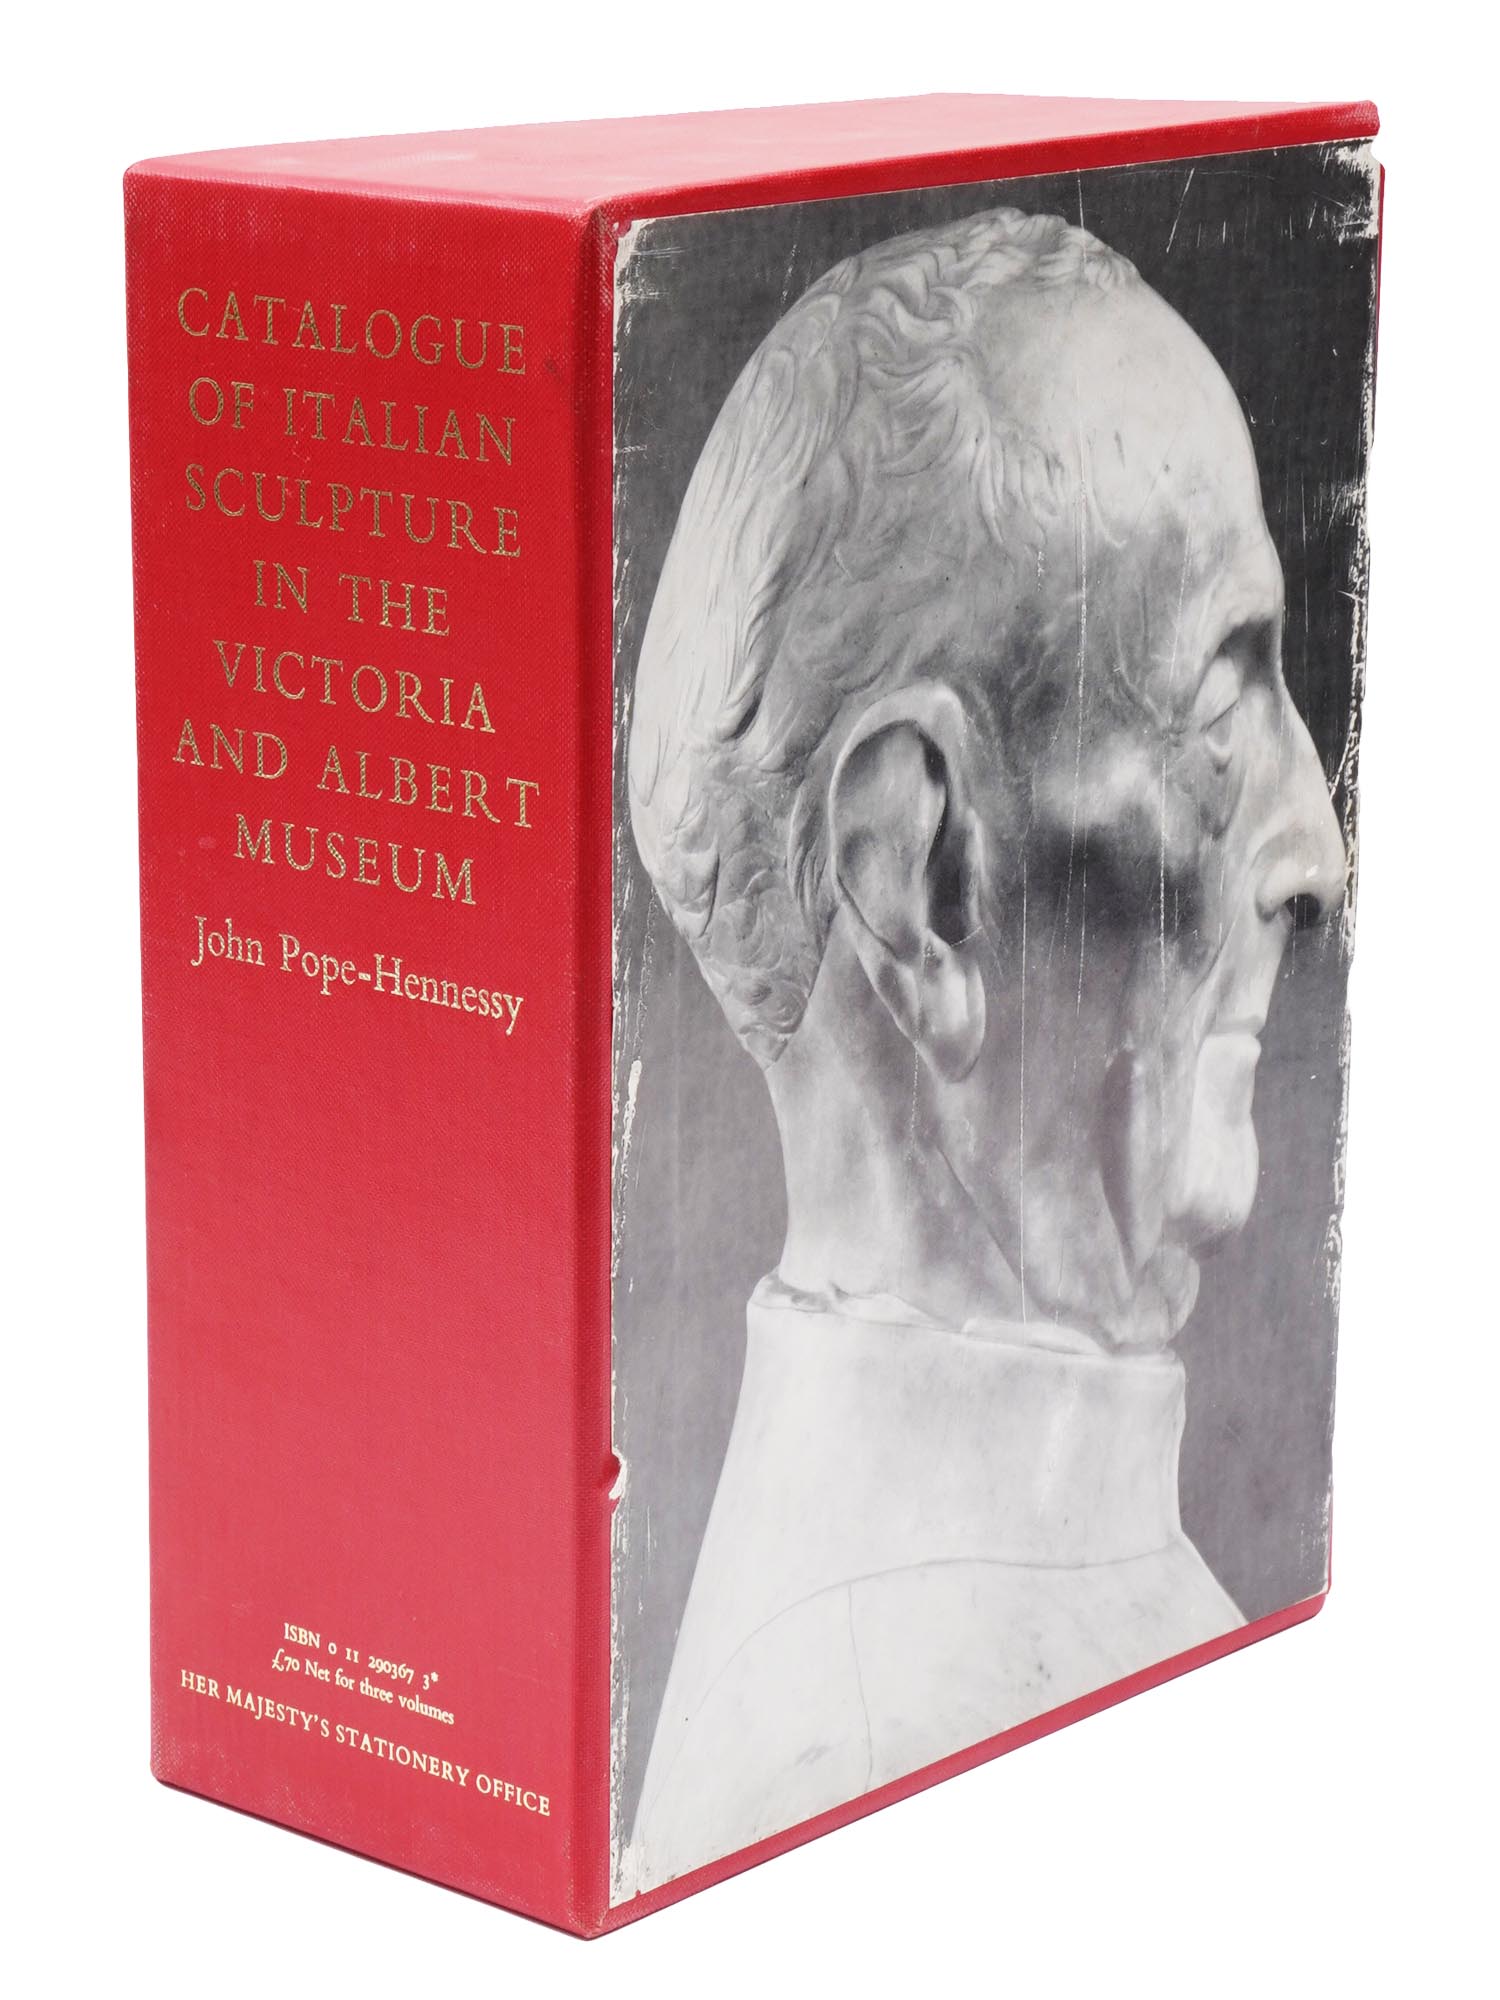 ITALIAN SCULPTURE BOOK SET BY JOHN POPE-HENNESSY PIC-1